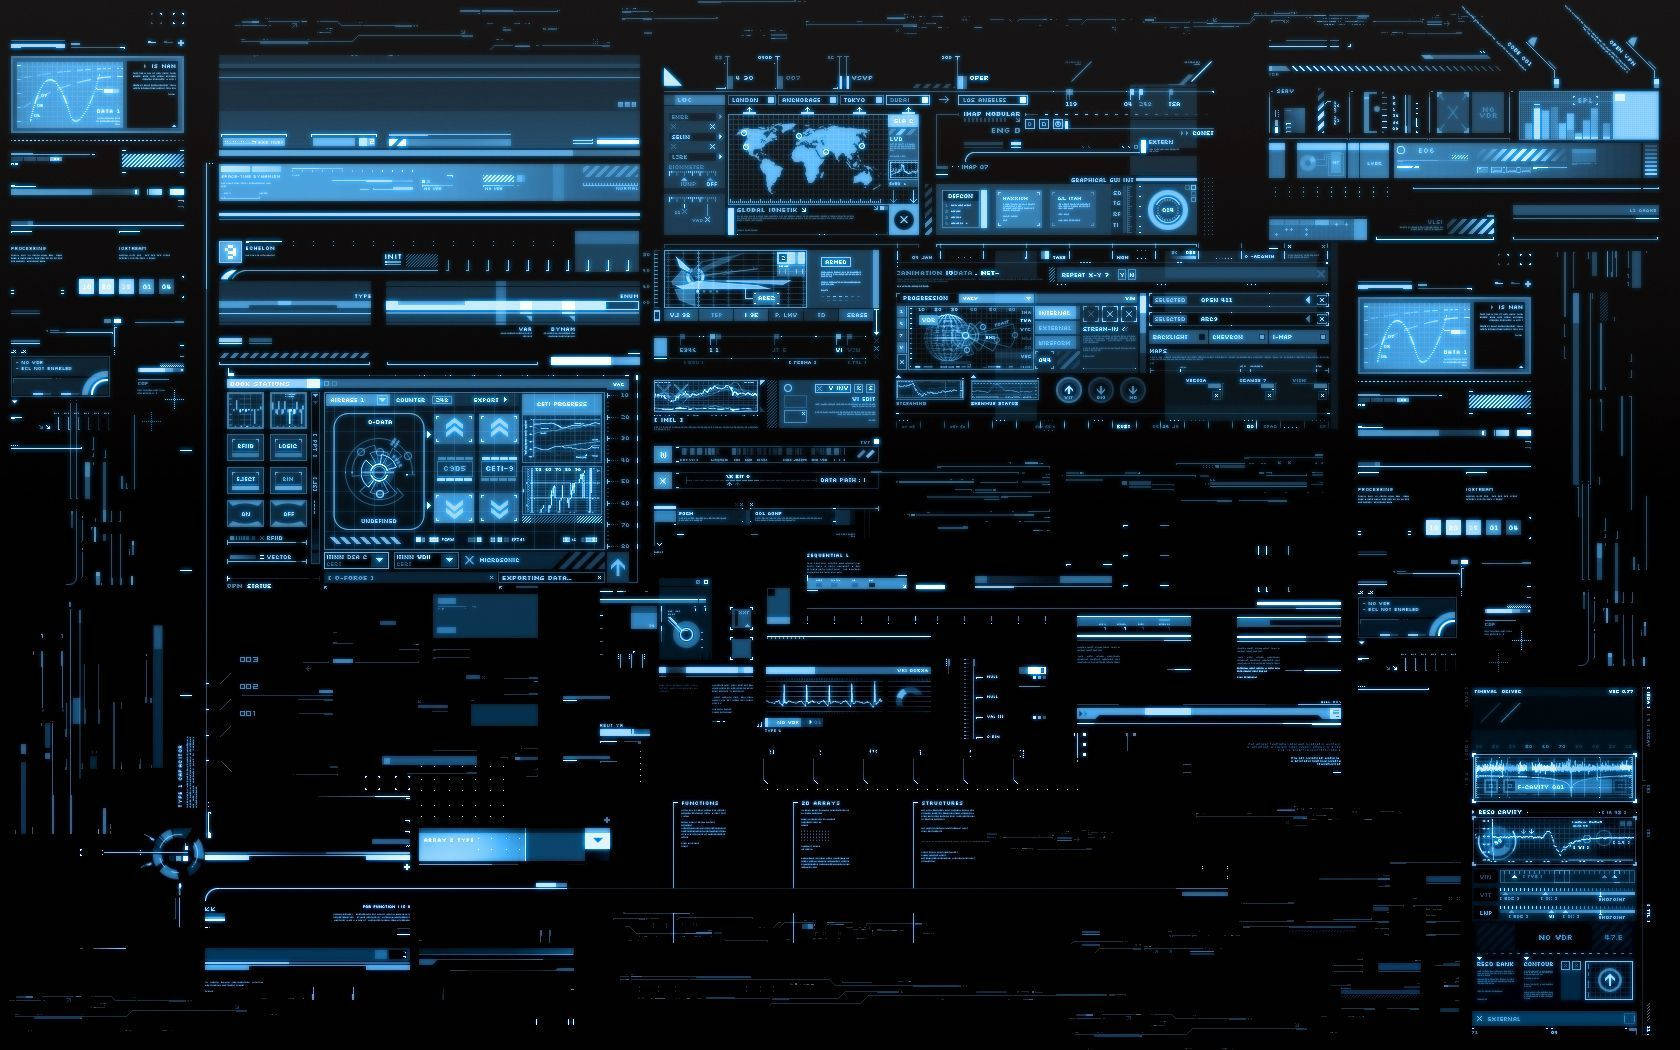 "Explore the future of technology through Computer Interfaces" Wallpaper